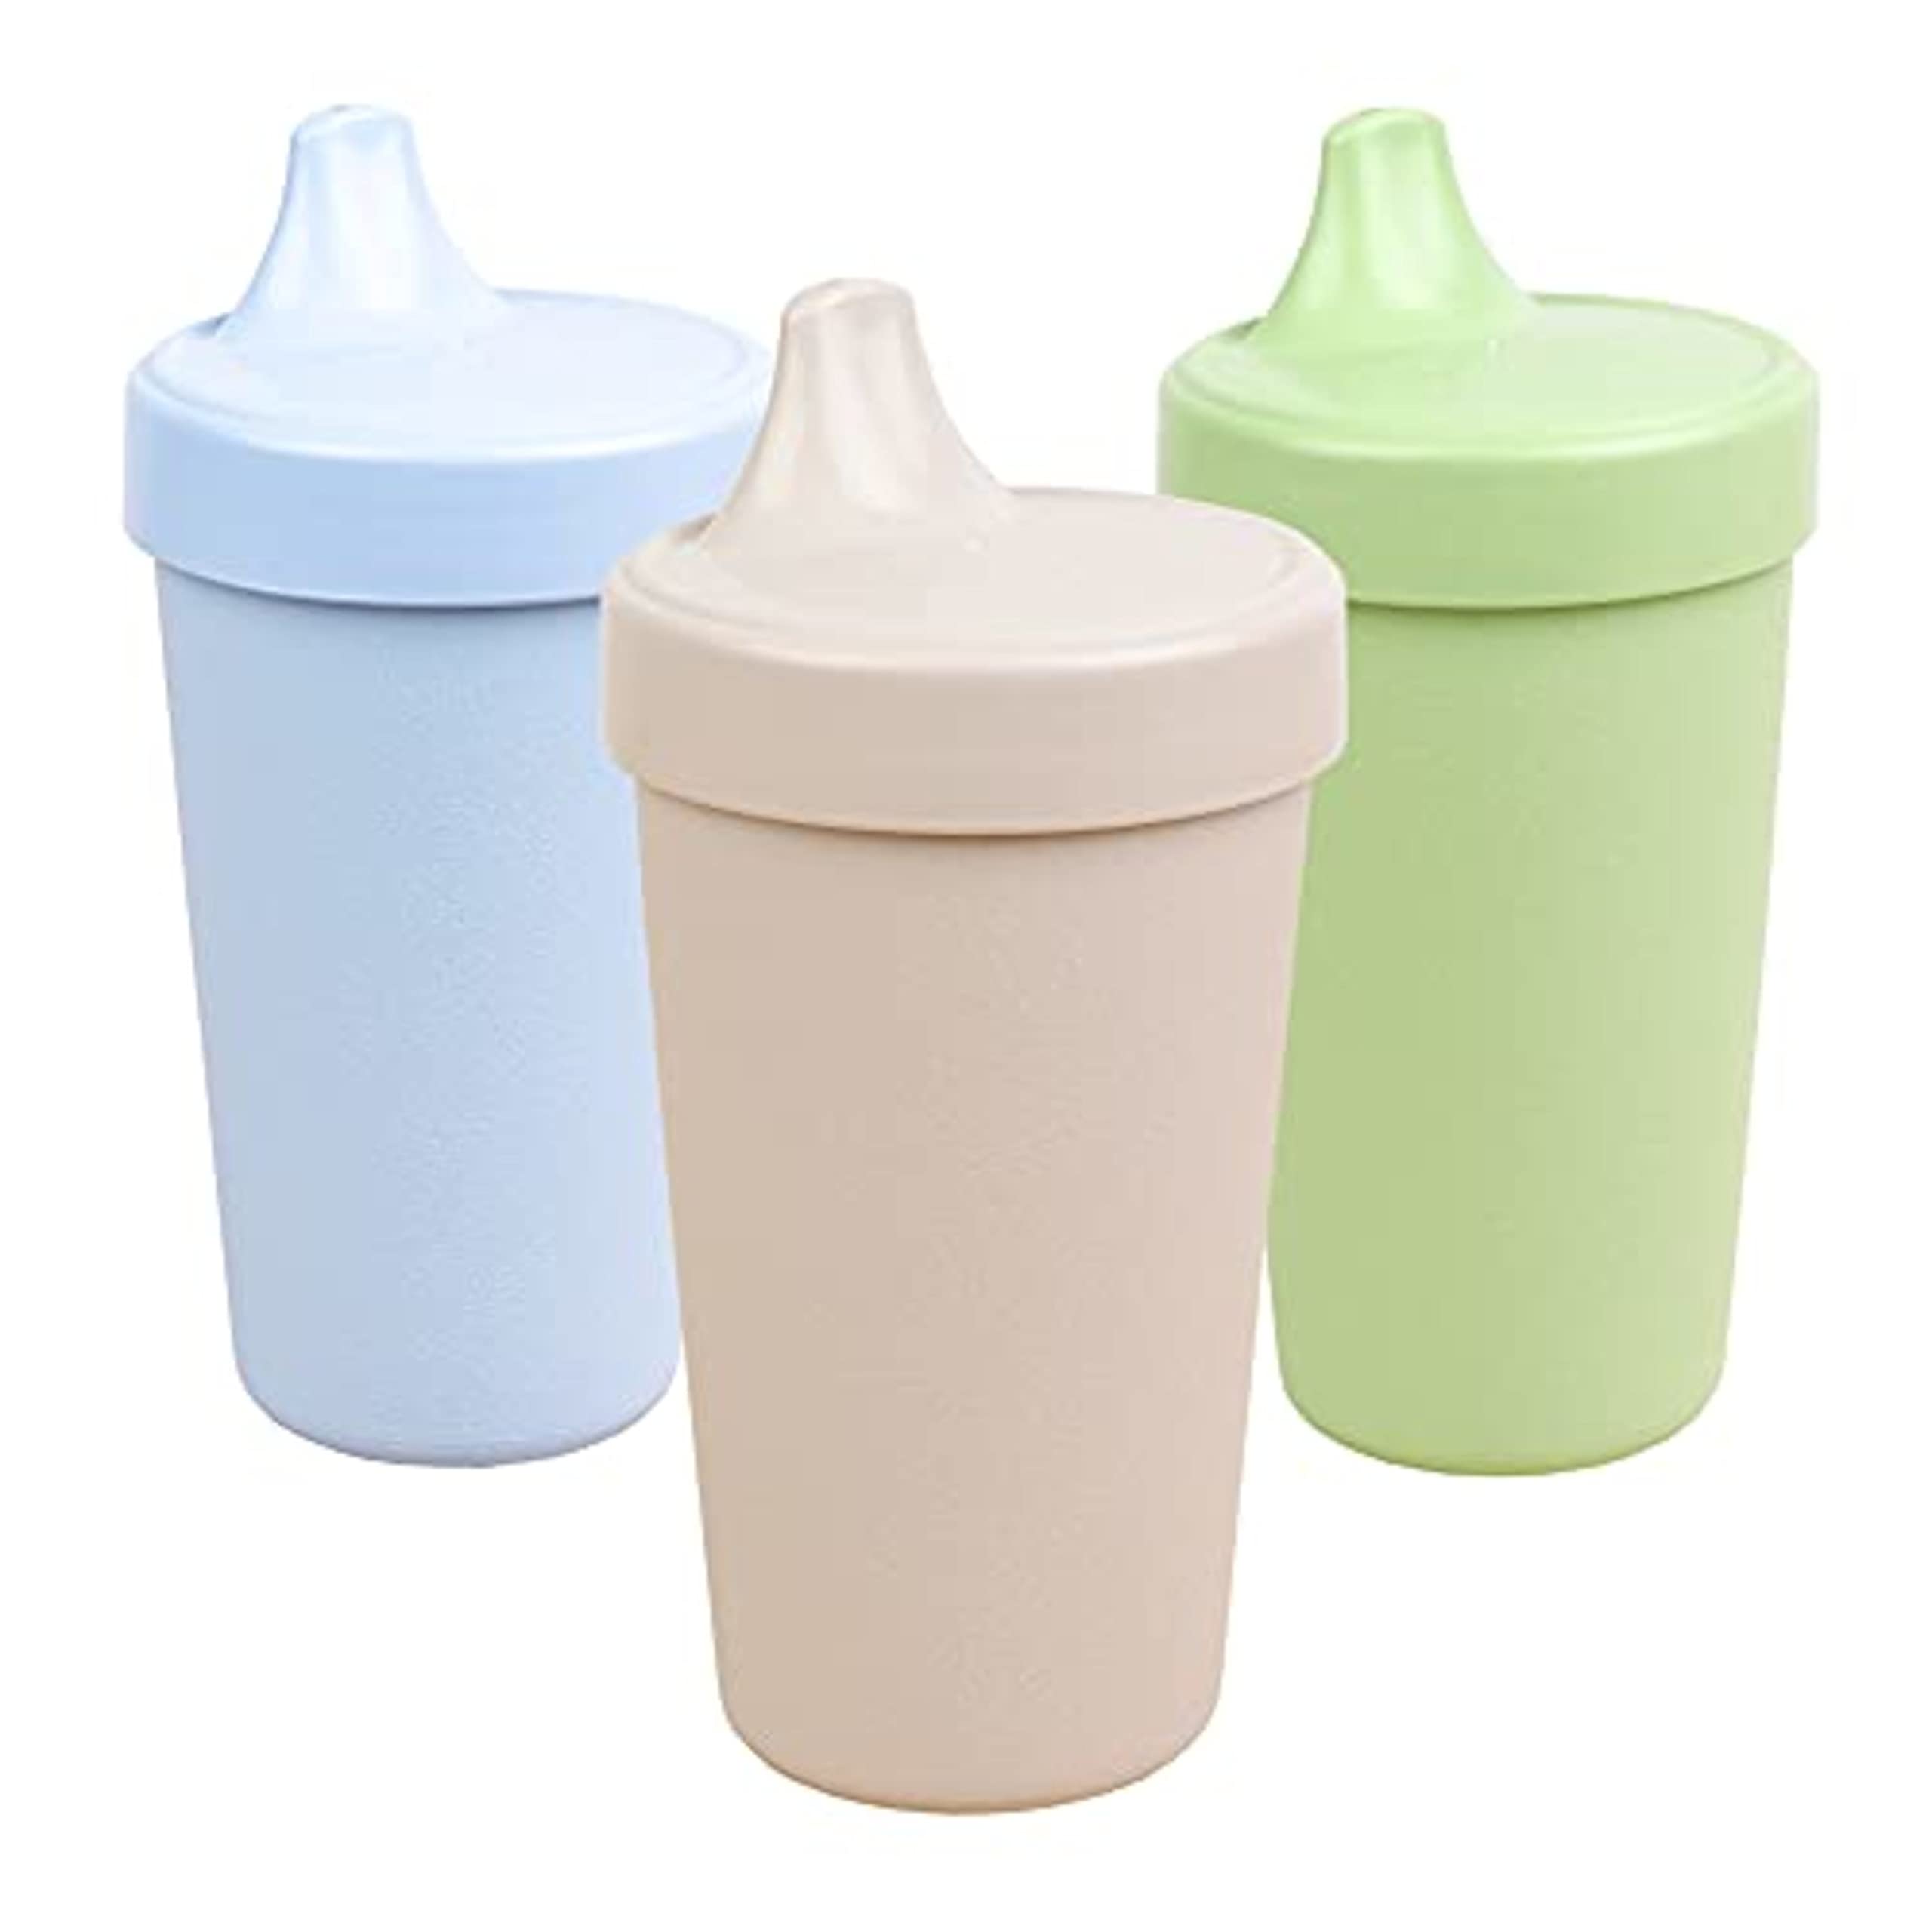 Re-Play Made in The USA 3pk Toddler Feeding No Spill Sippy Cups